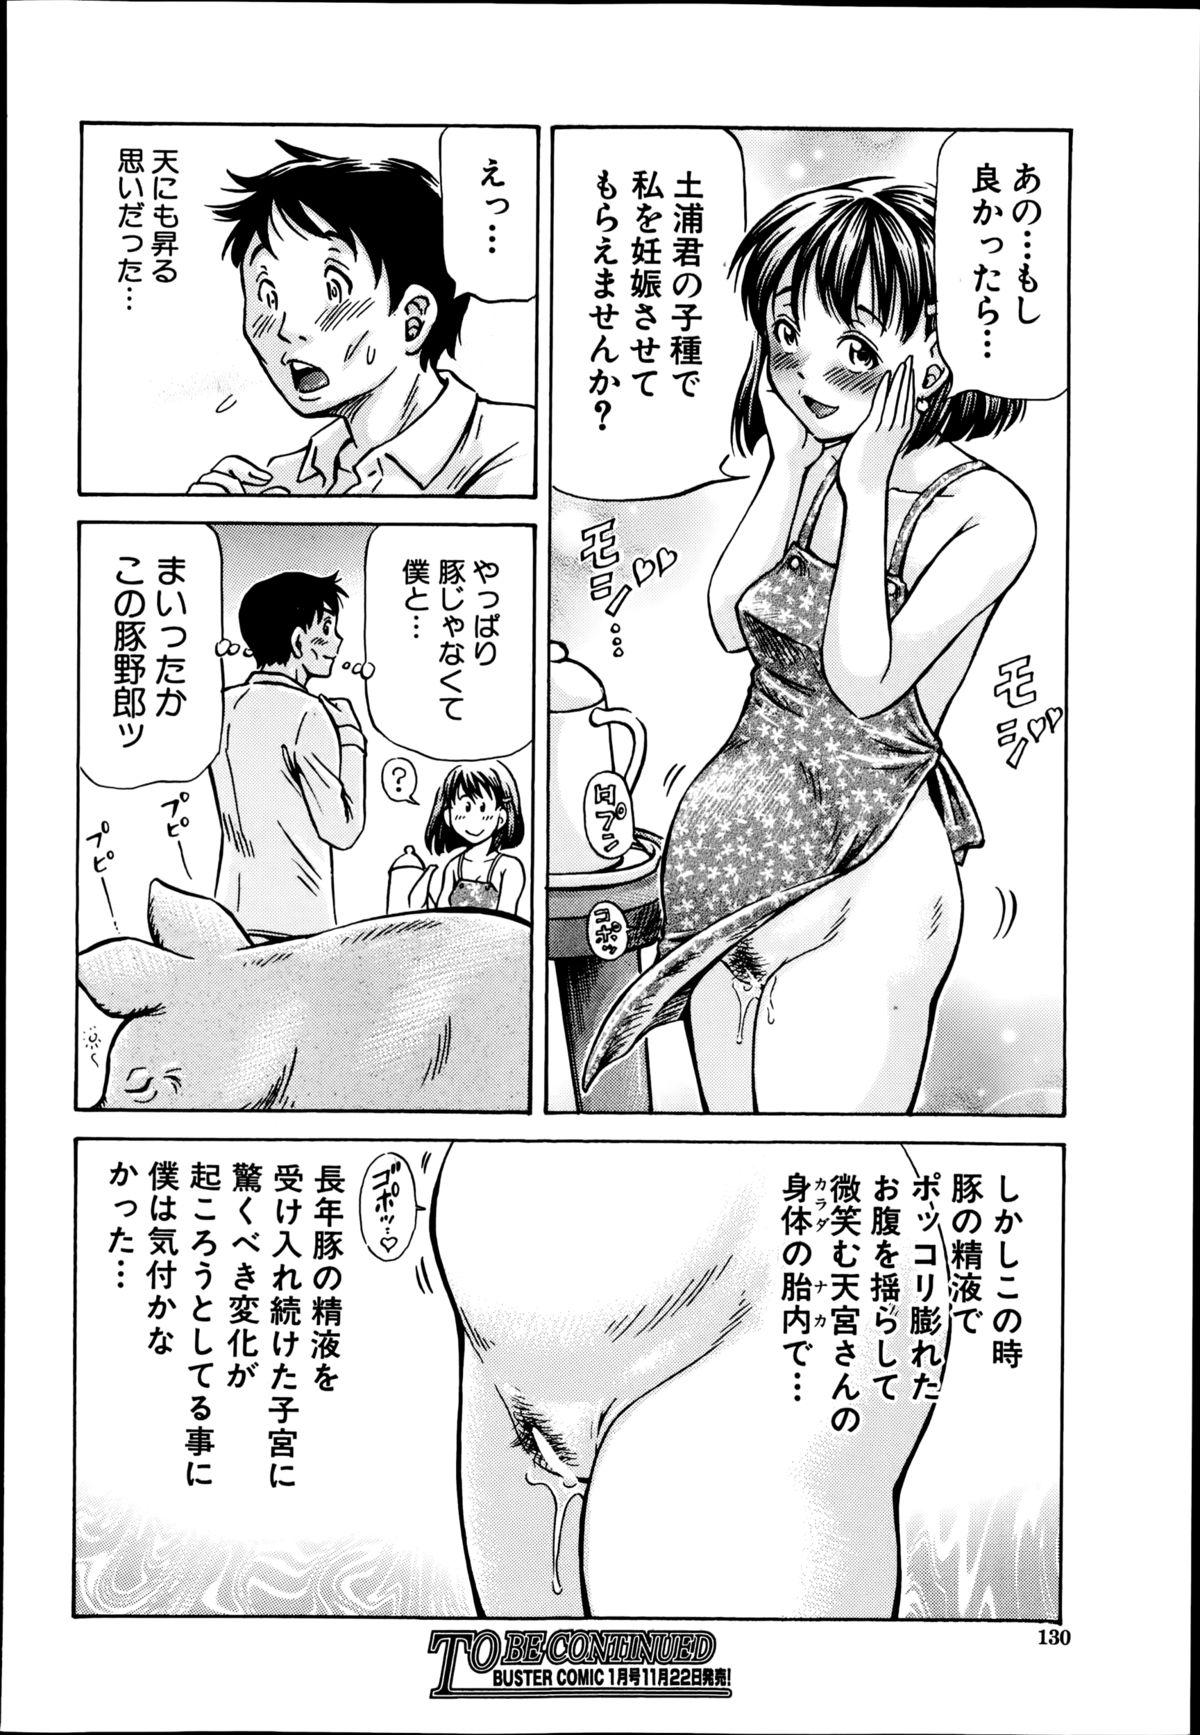 BUSTER COMIC 2014-11 130